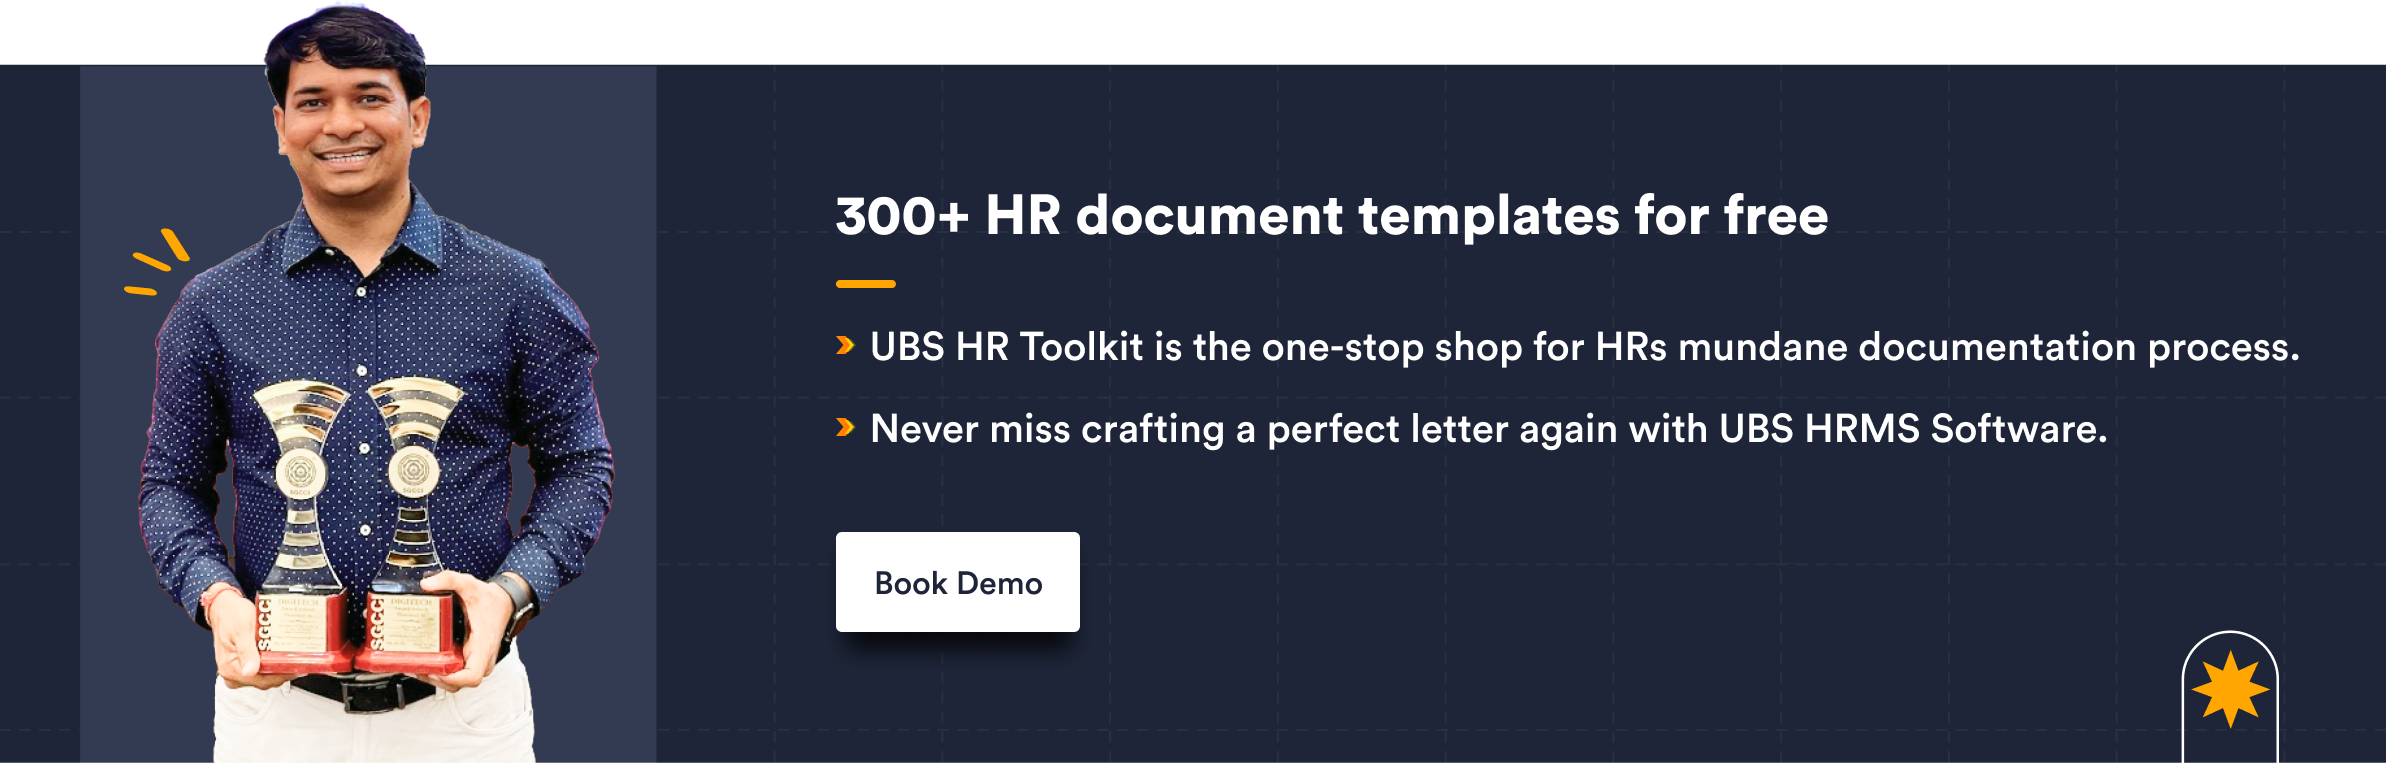 300 HR document templates for free